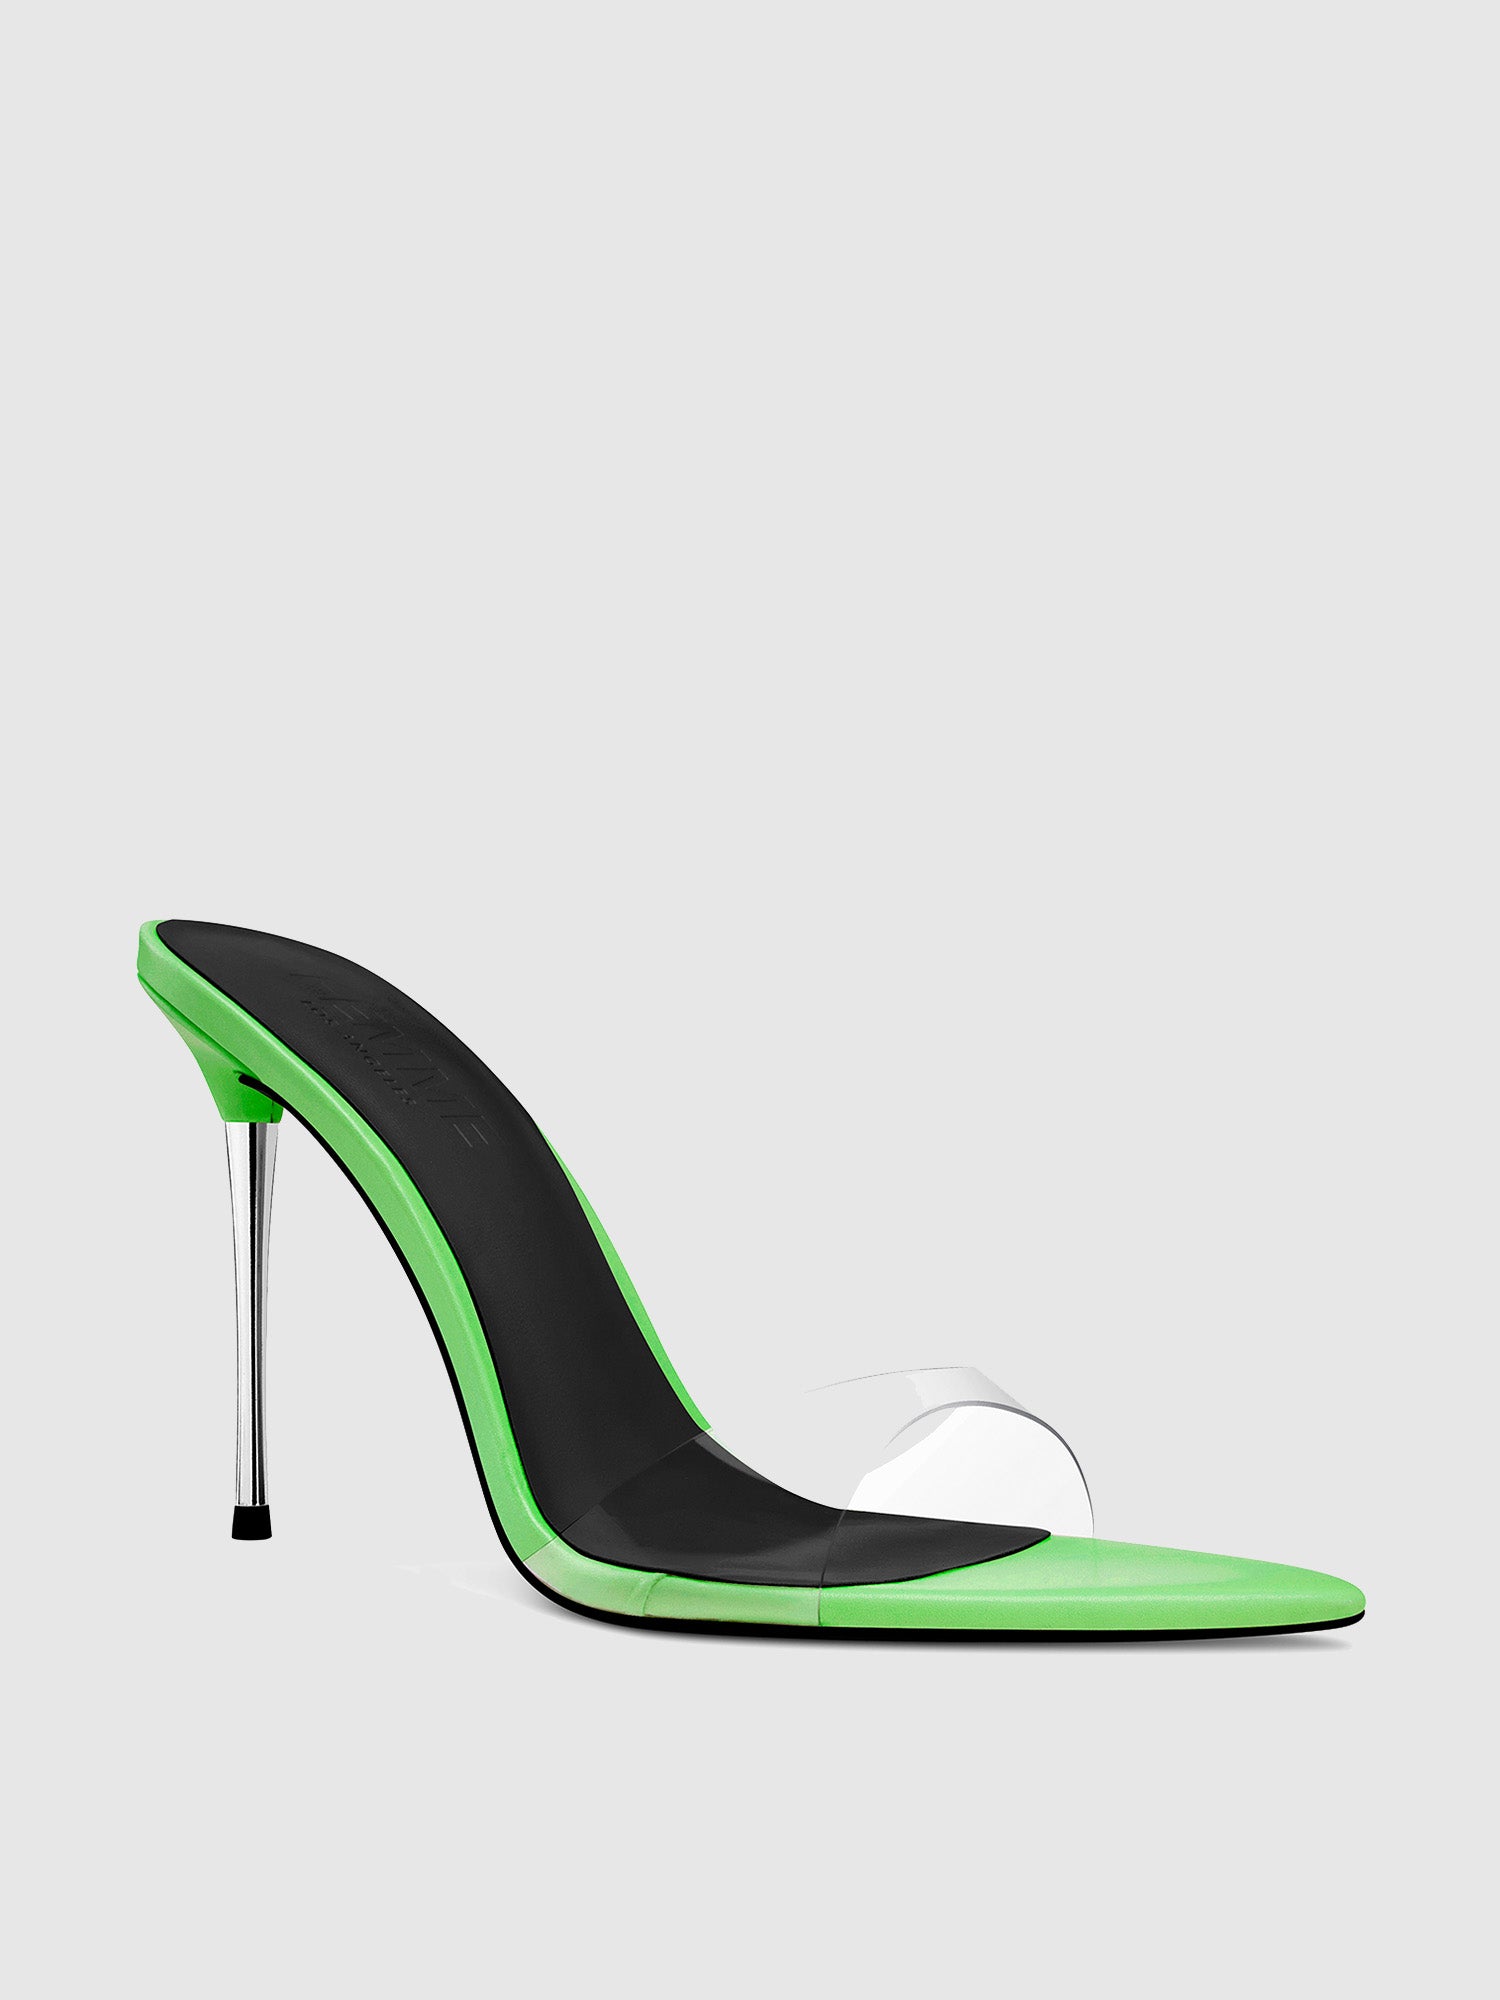 Green Leather-Look Flared Stiletto Heel Sandals | New Look